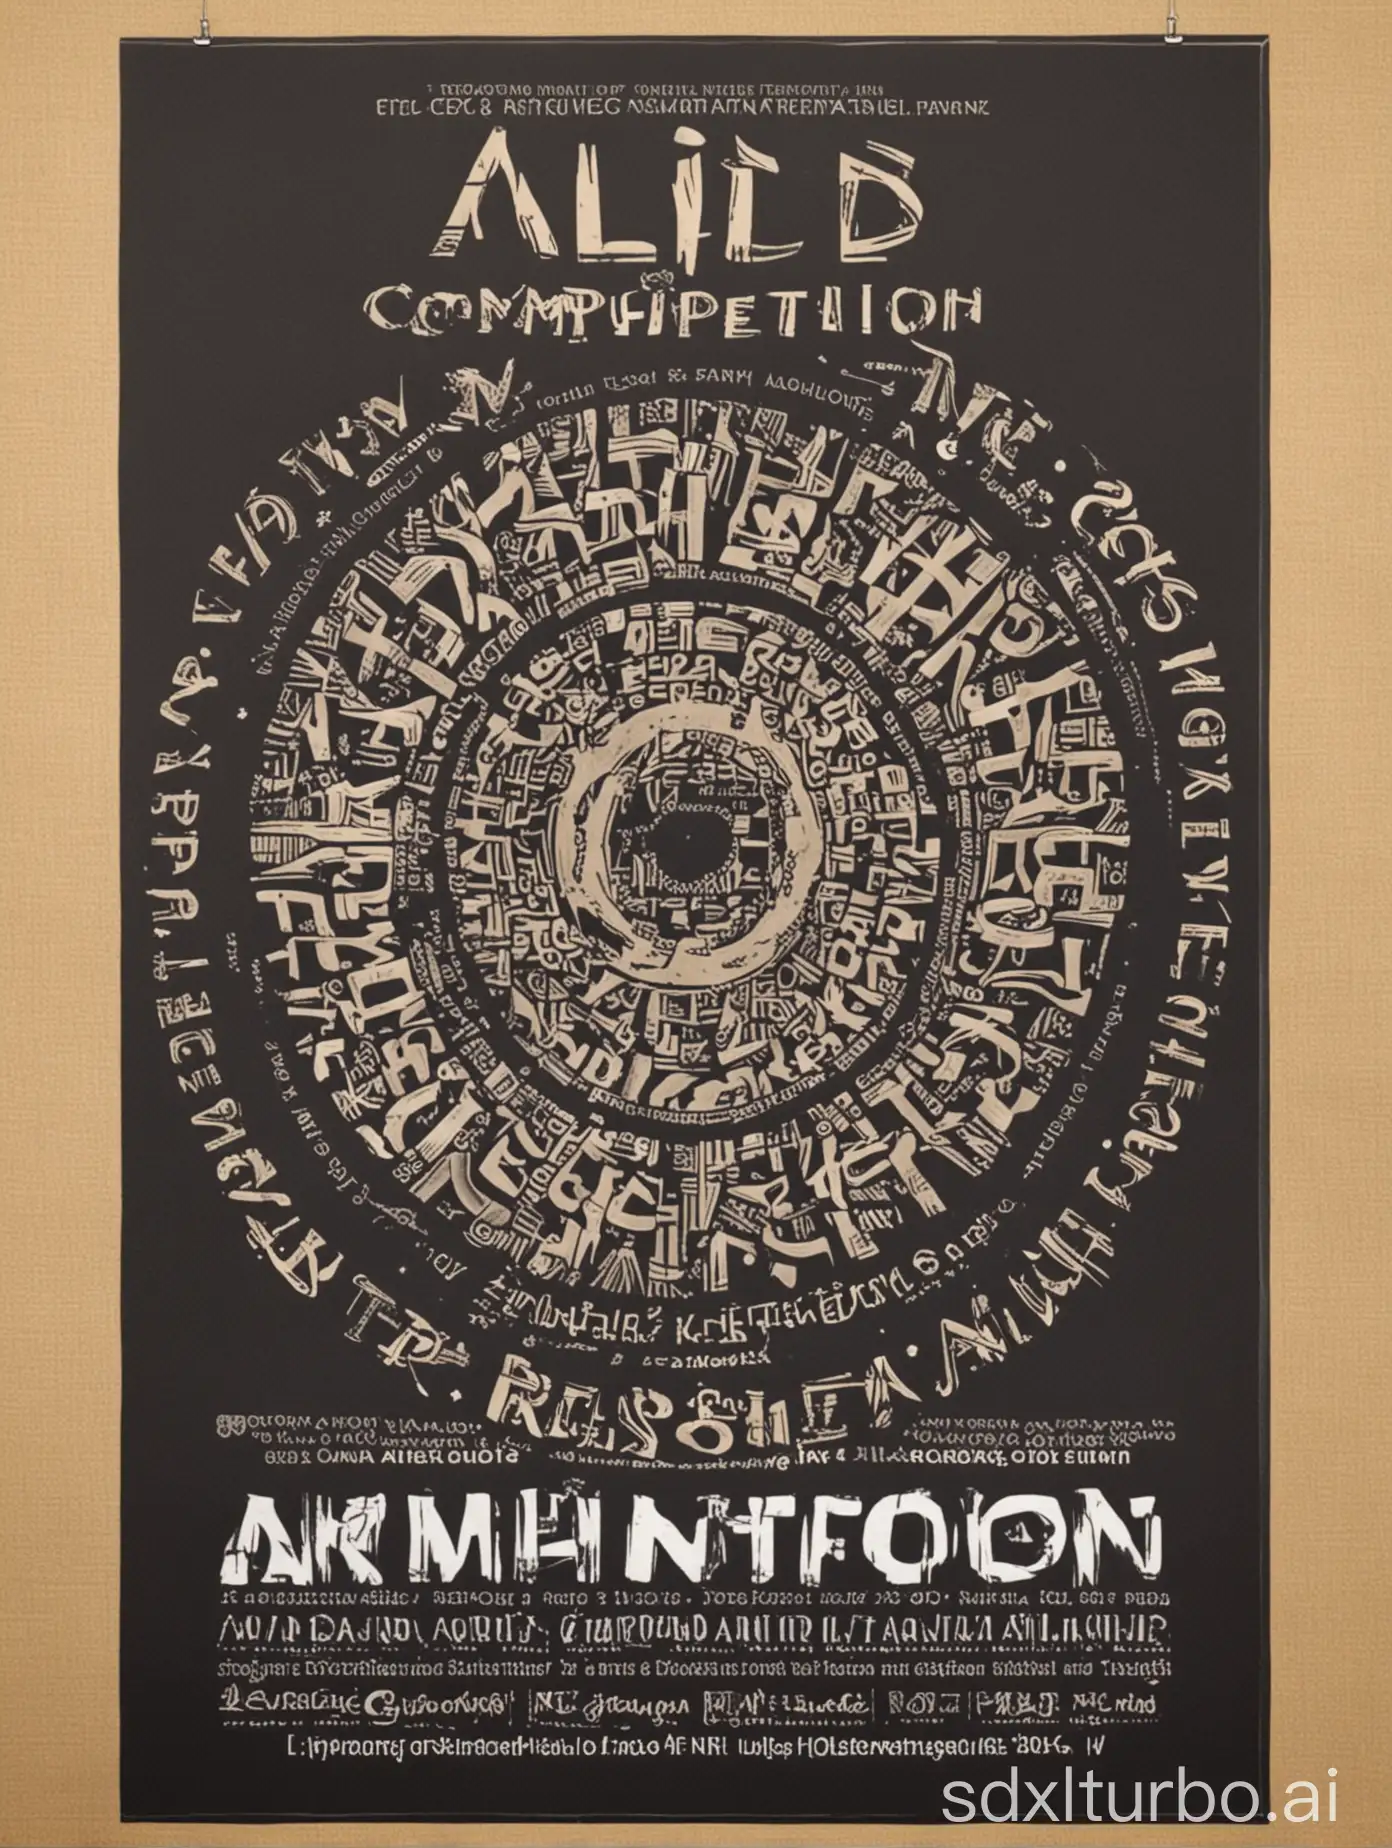 AILD competition poster